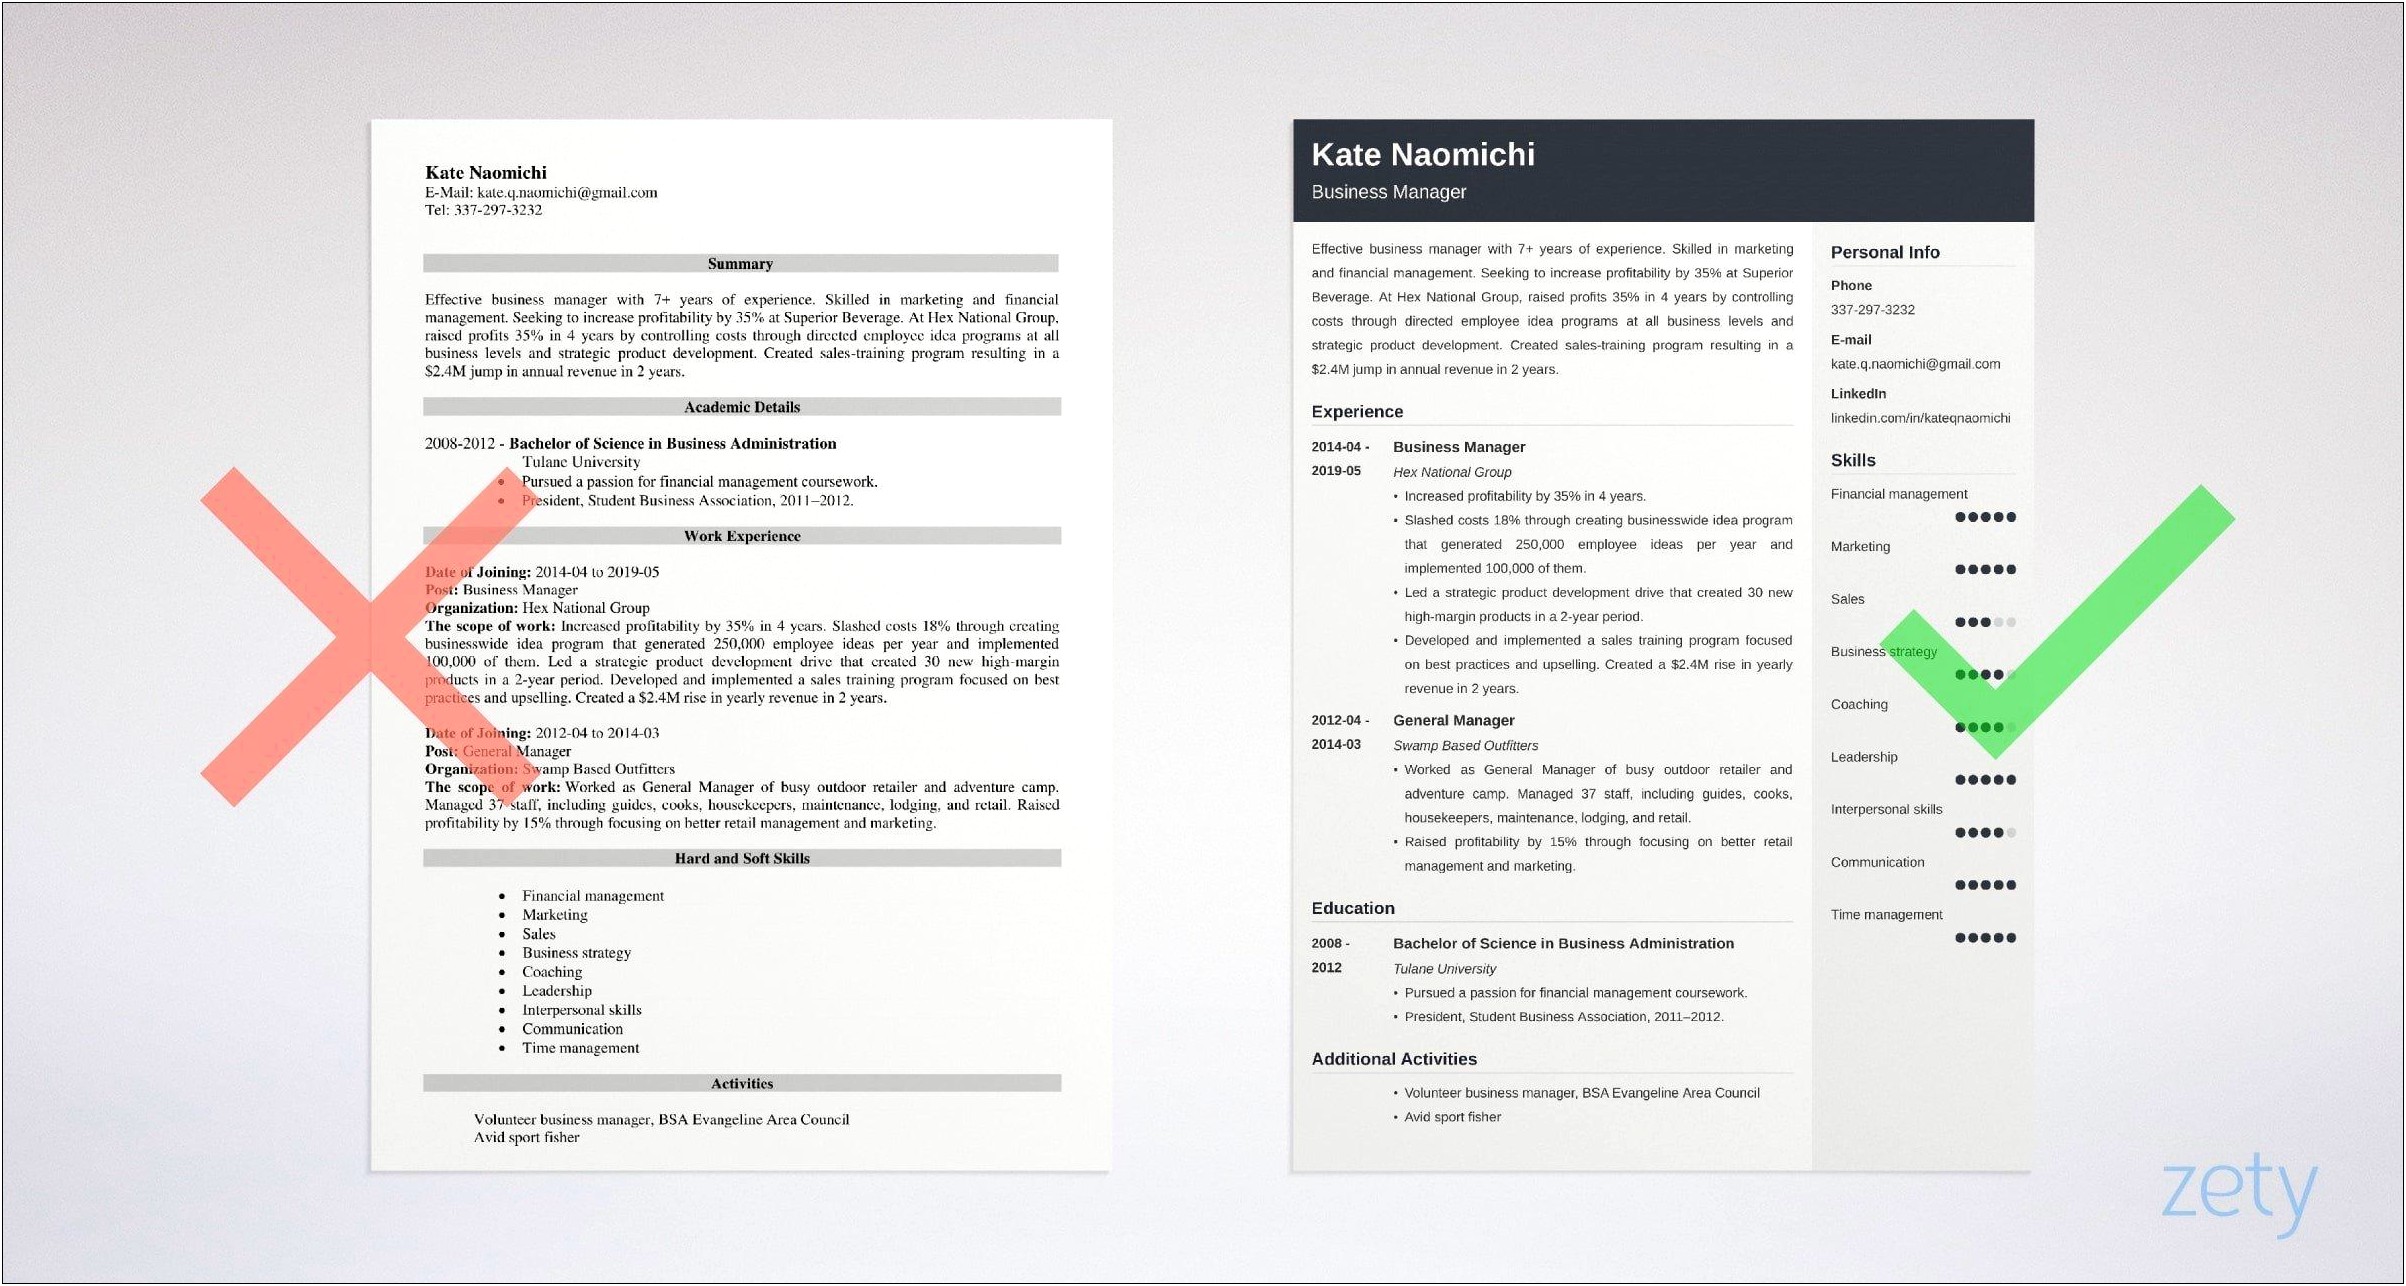 Resume Objective For Business Management Position